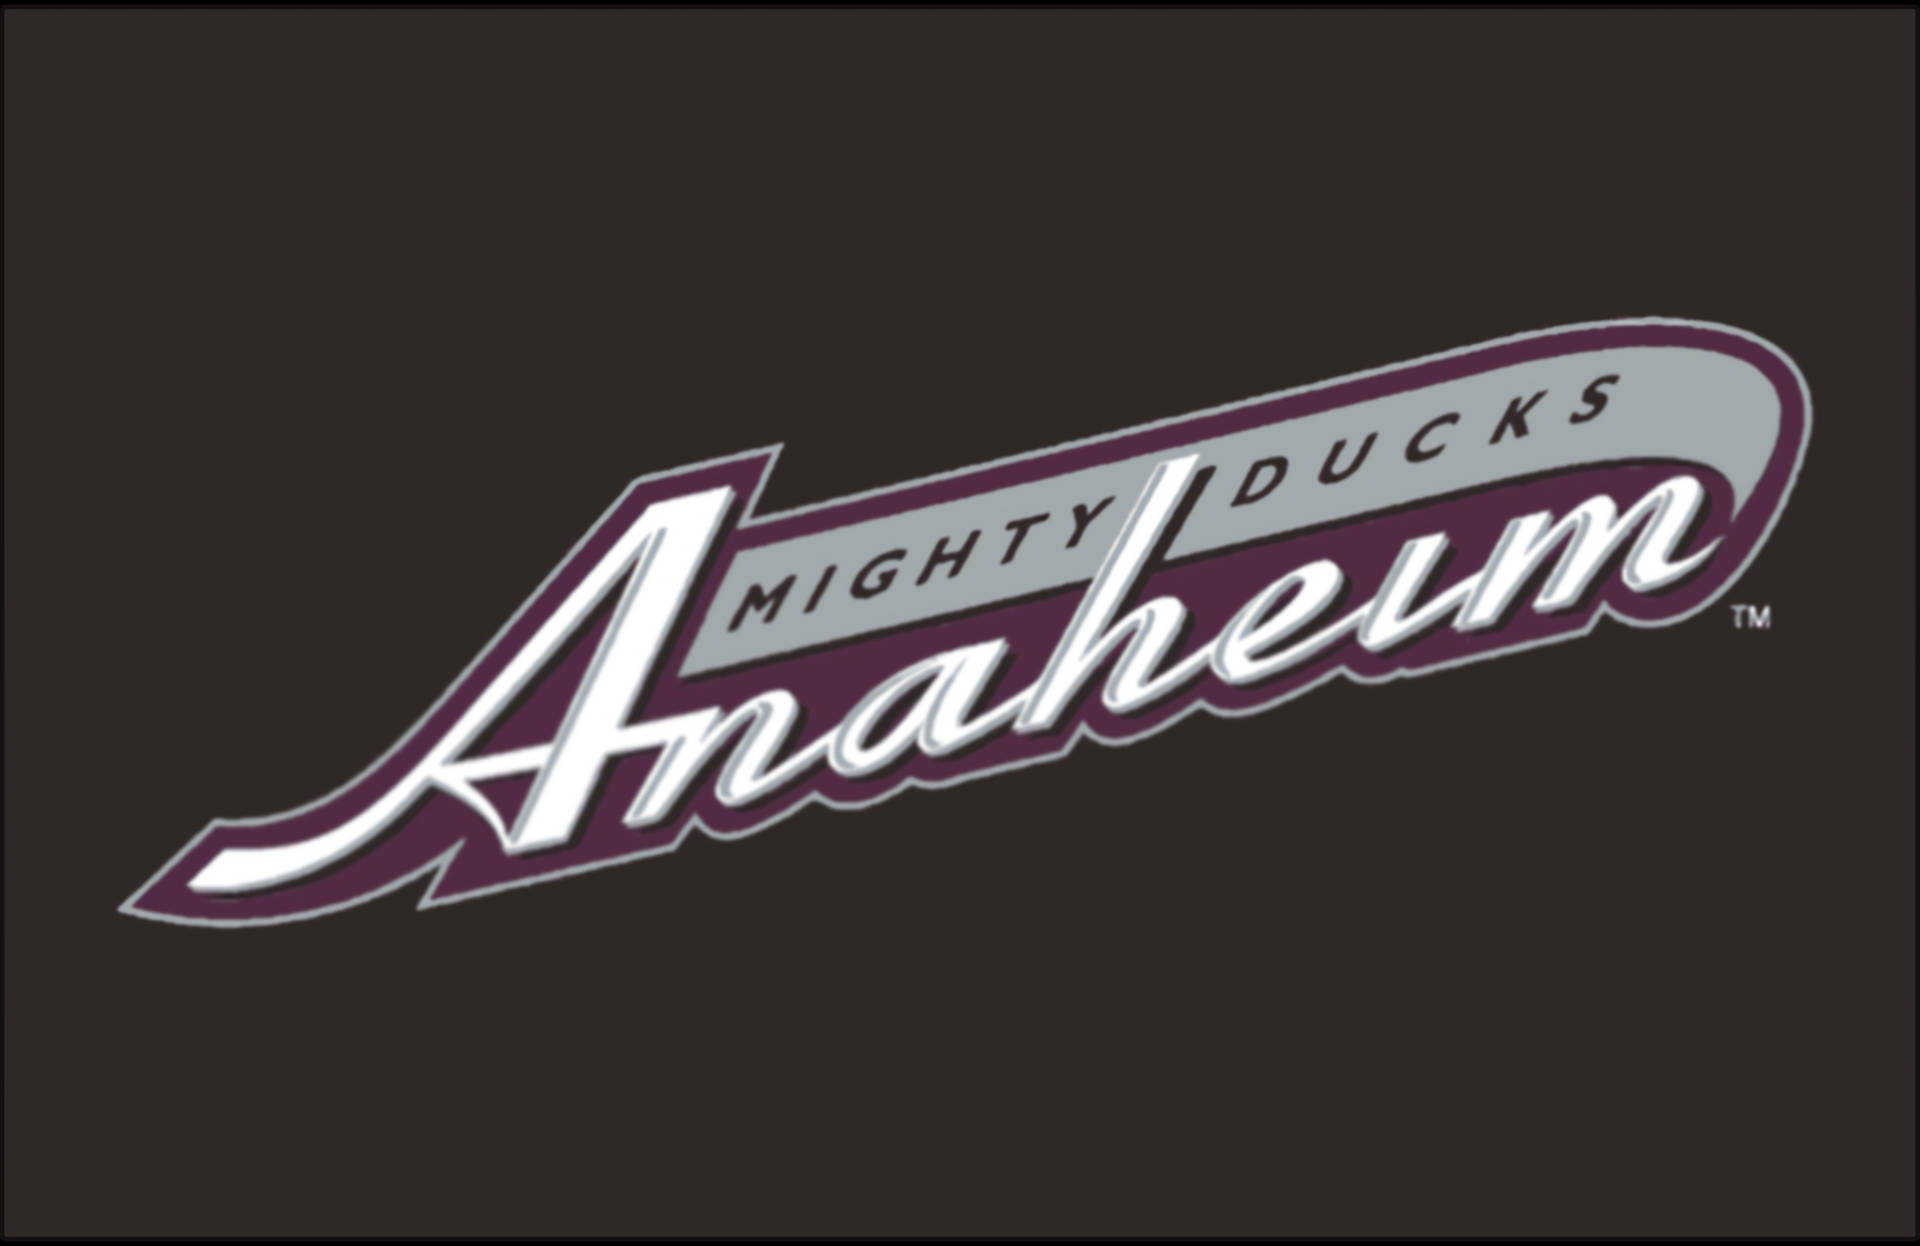 Classic Jersey Logo Design Of The Anaheim Ducks From 2003 Background